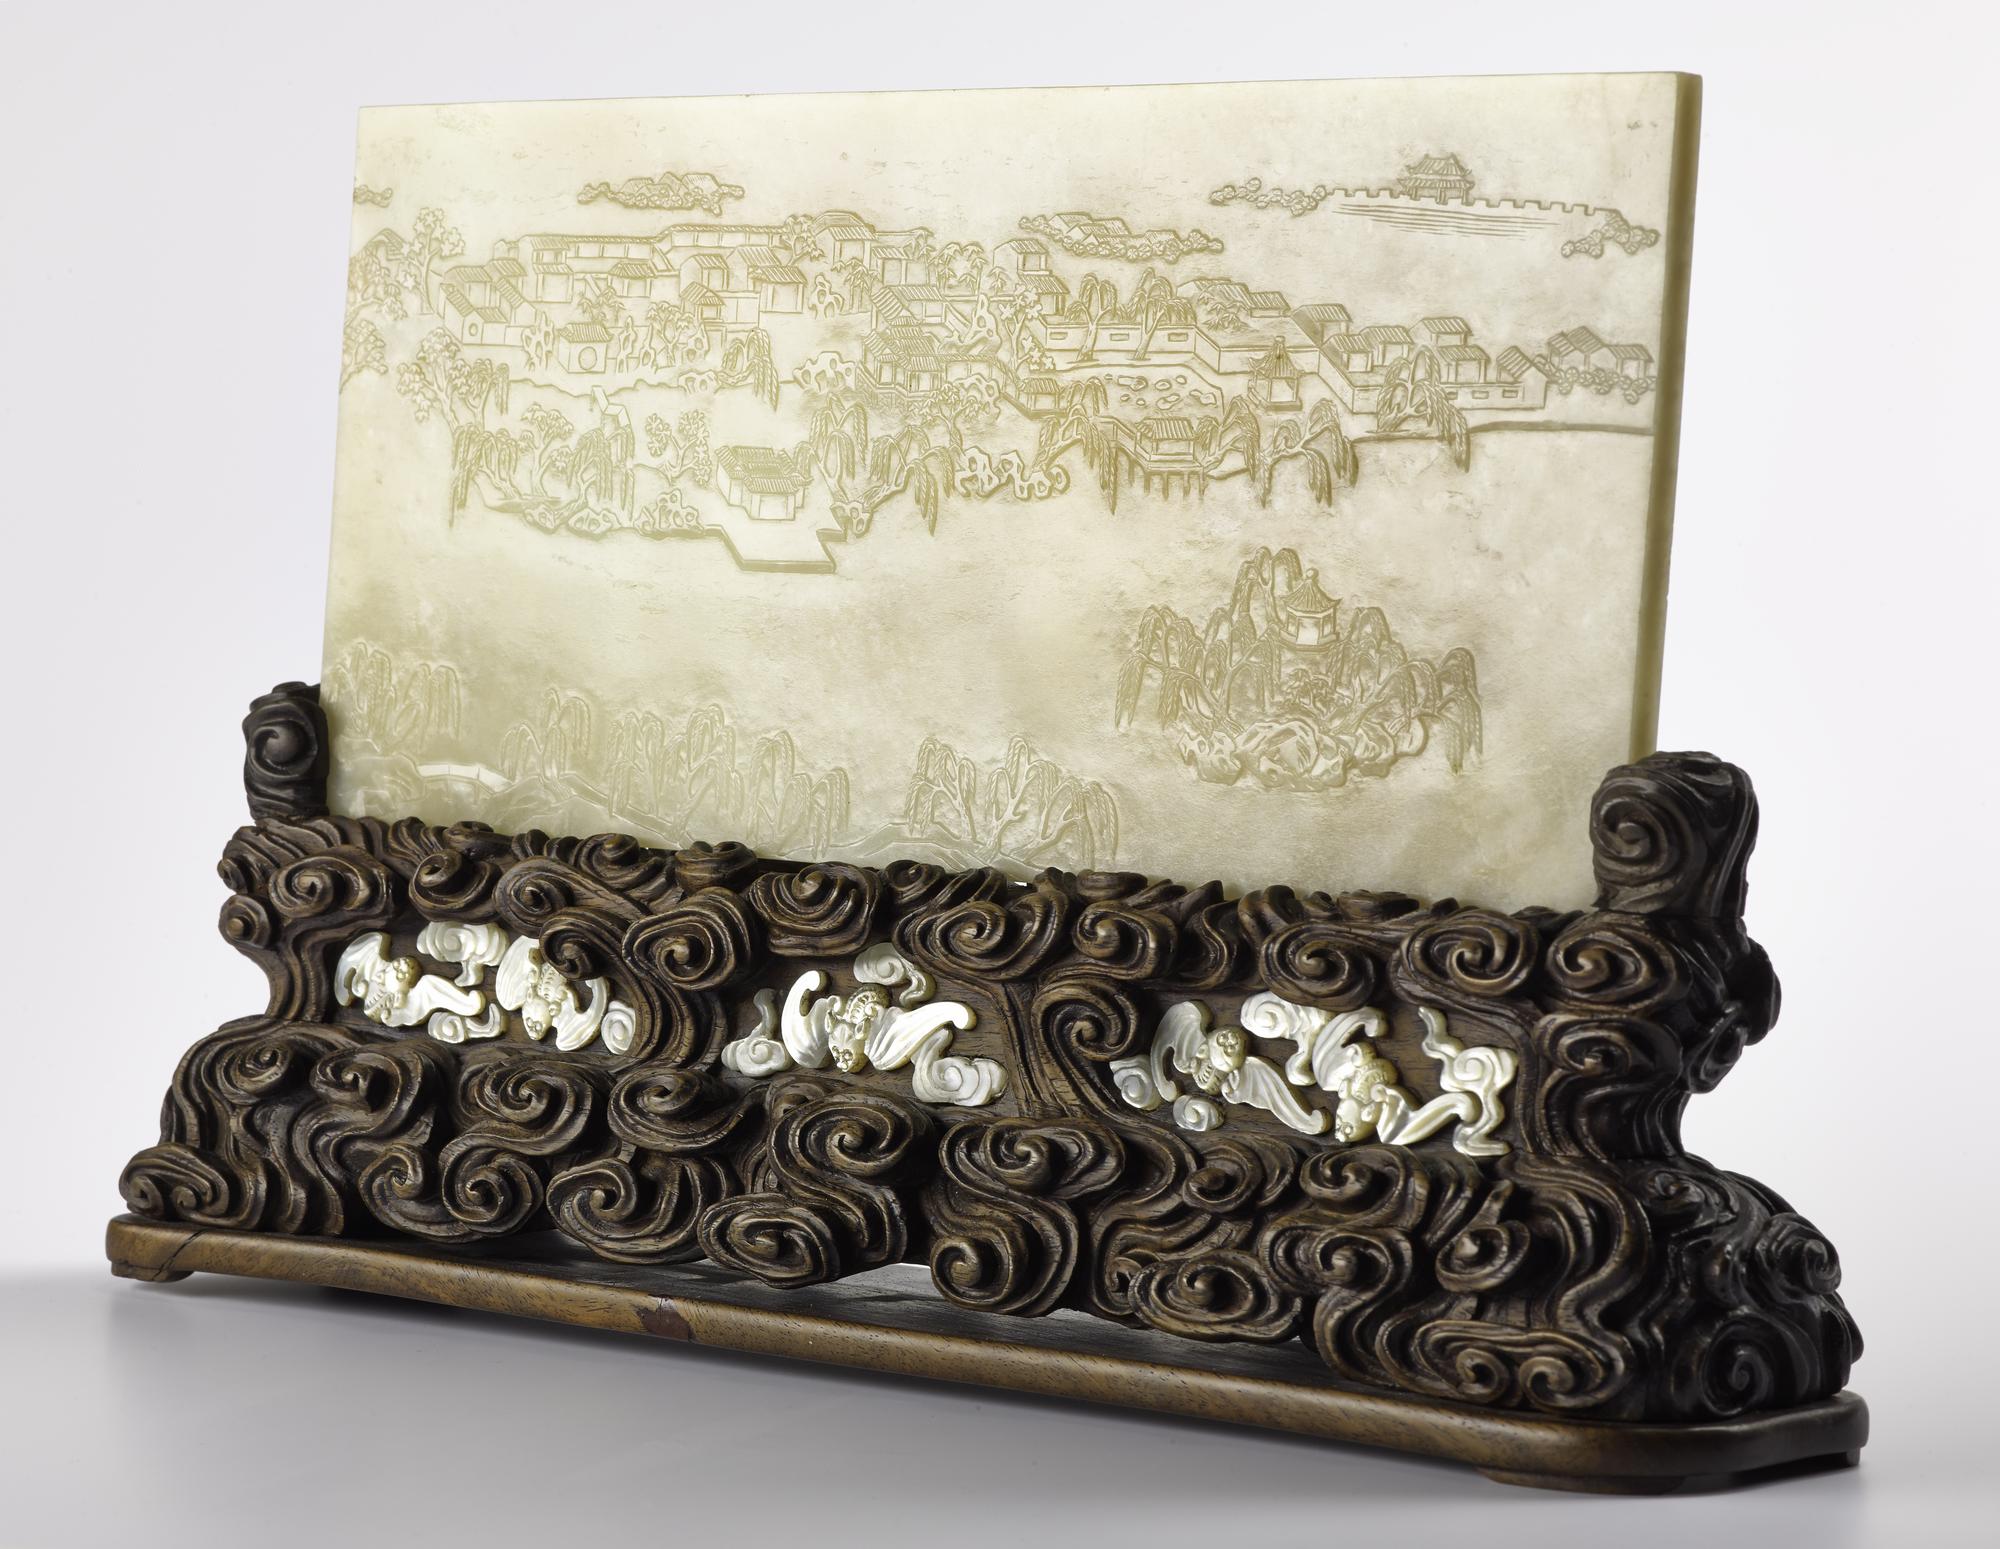 Table screen of pale grey jade, engraved on one side with a landscape and with a poem in the other side by the Qianlong Emperor, dated 1784, with carved wood stand inlaid with bats in mother-of-pearl: China, Qing Dynasty, Qianlong reign, 1735-1796.